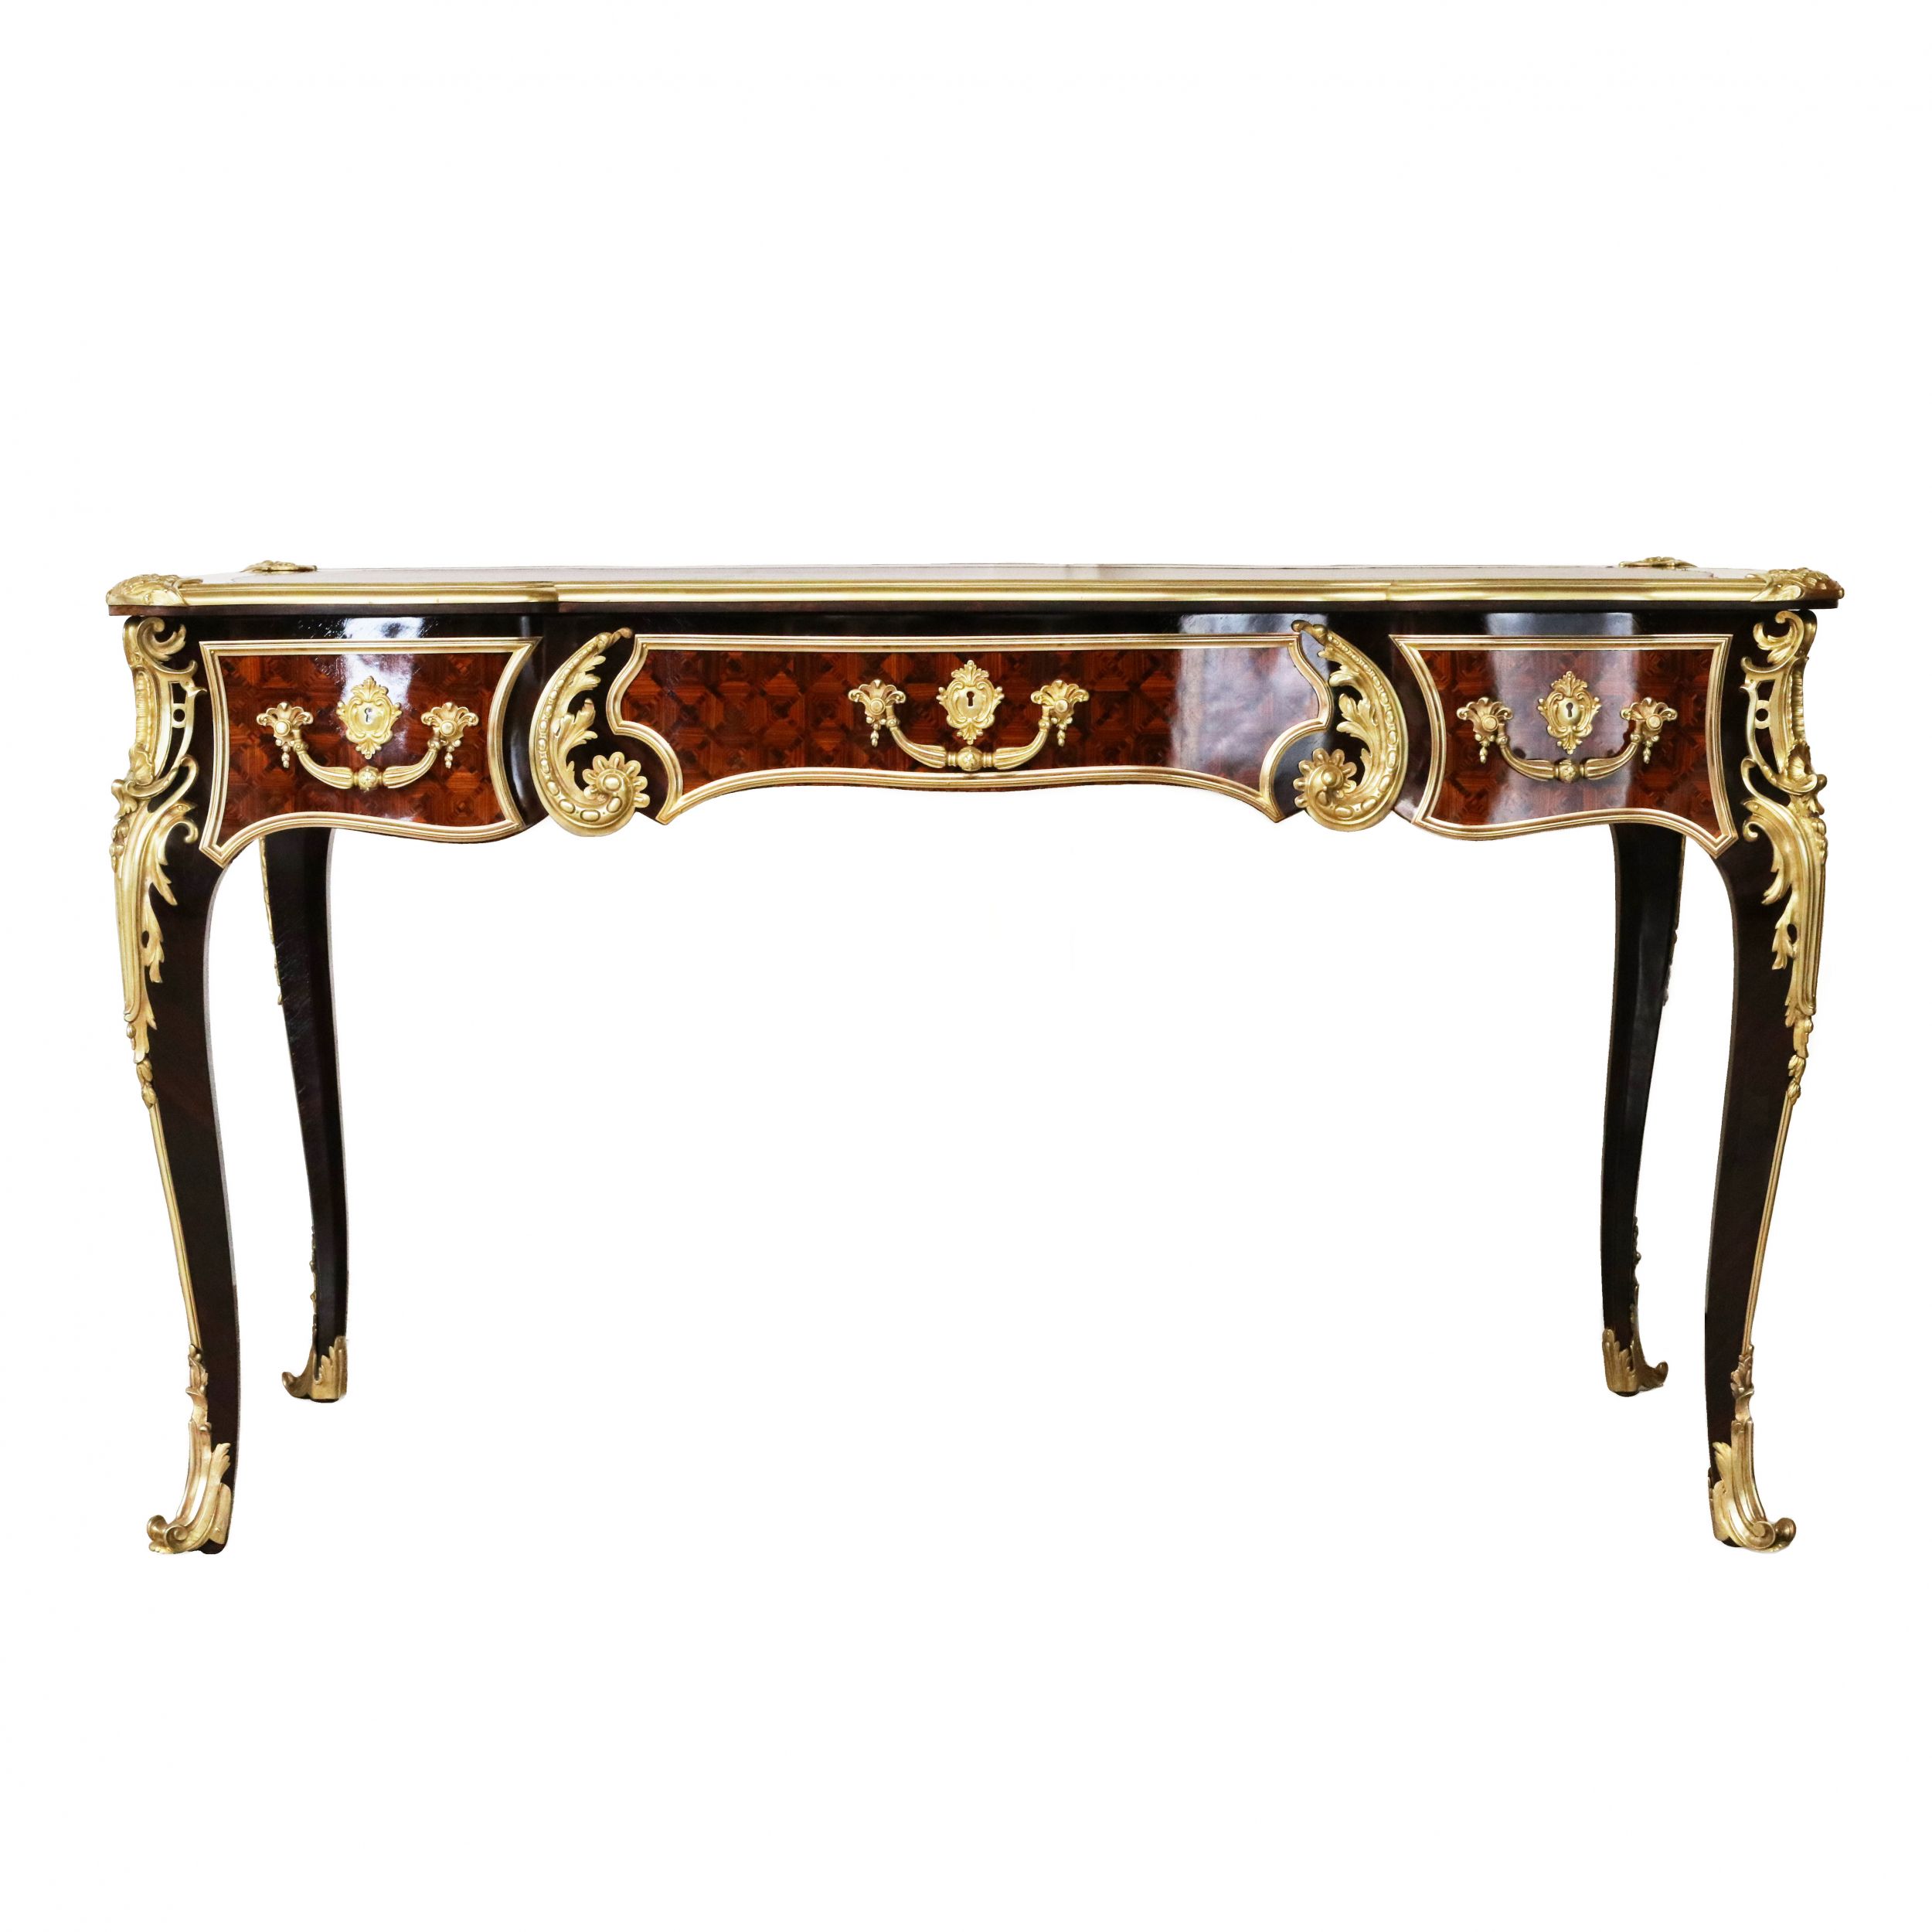 Magnificent writing desk in wood and gilded bronze, Louis XV style. - Image 4 of 8